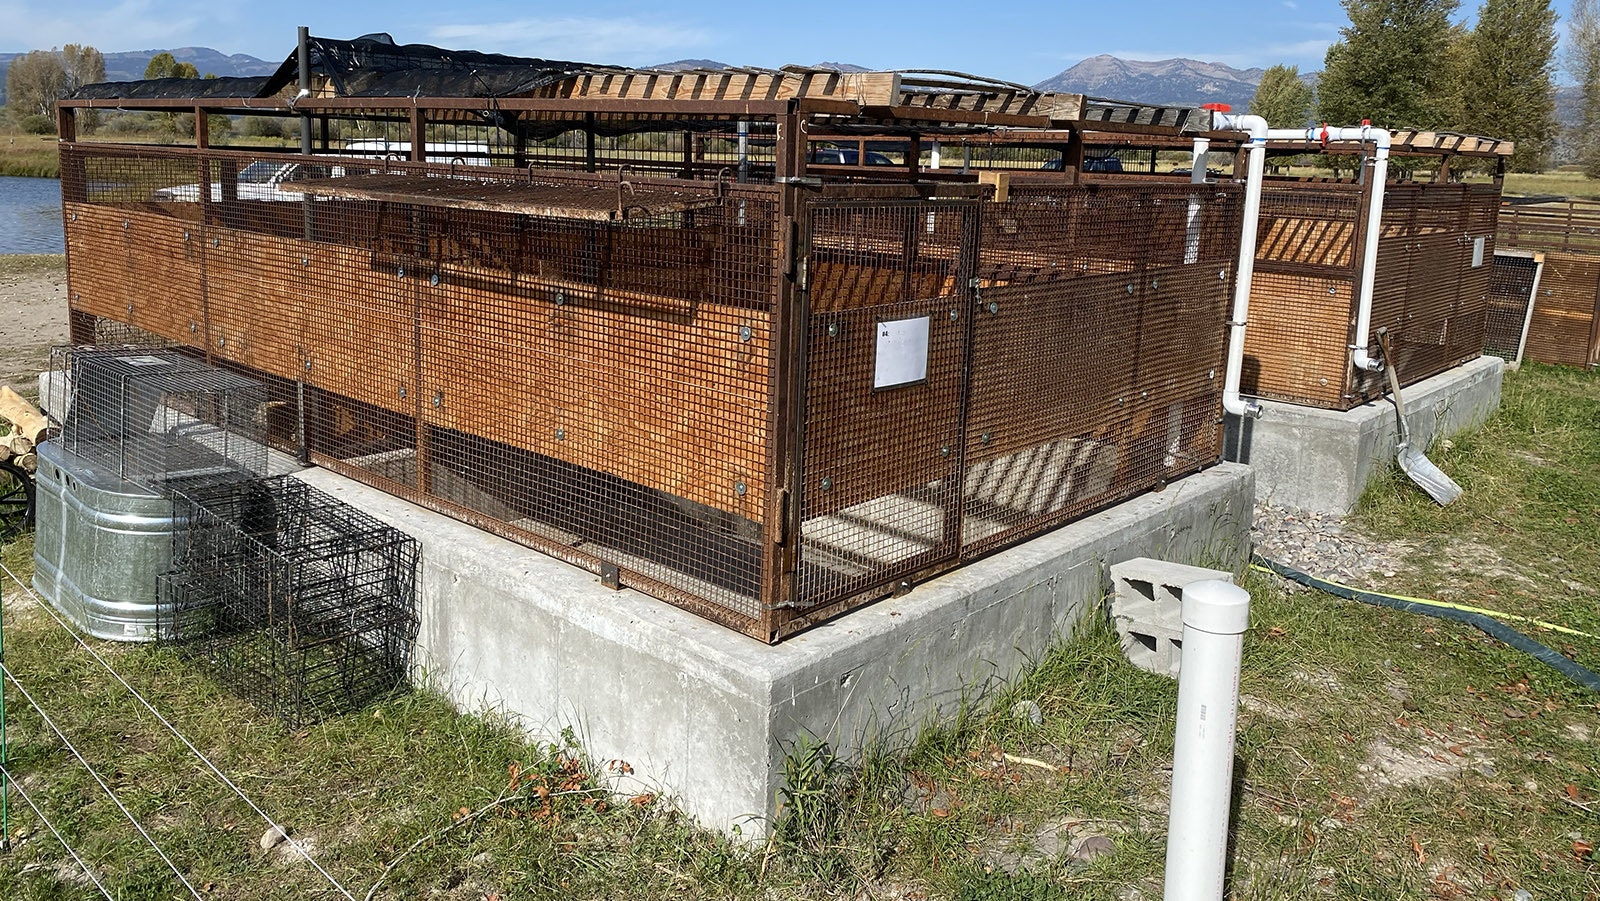 A beaver husbandry facility located in Jackson is operated by Wyoming Wetlands.